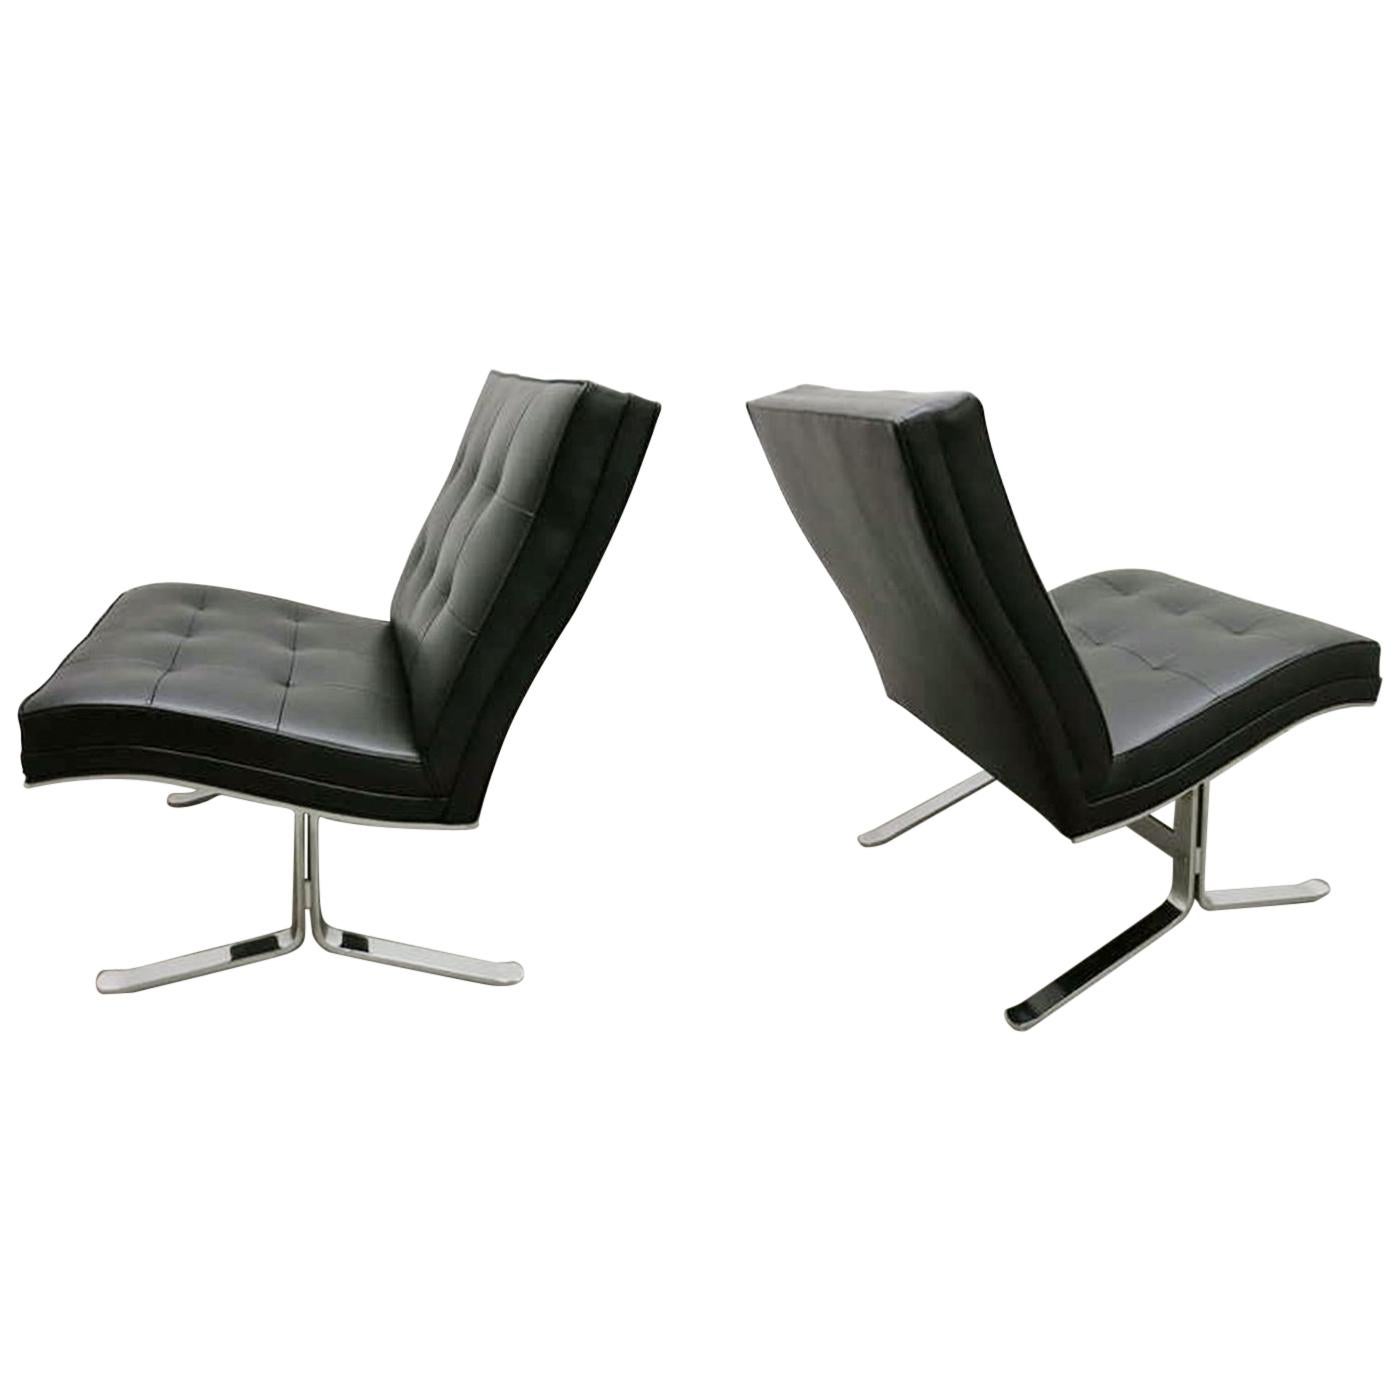 Pair of Leather and Steel Lounge Chairs by Mobilier International, France, 1970s